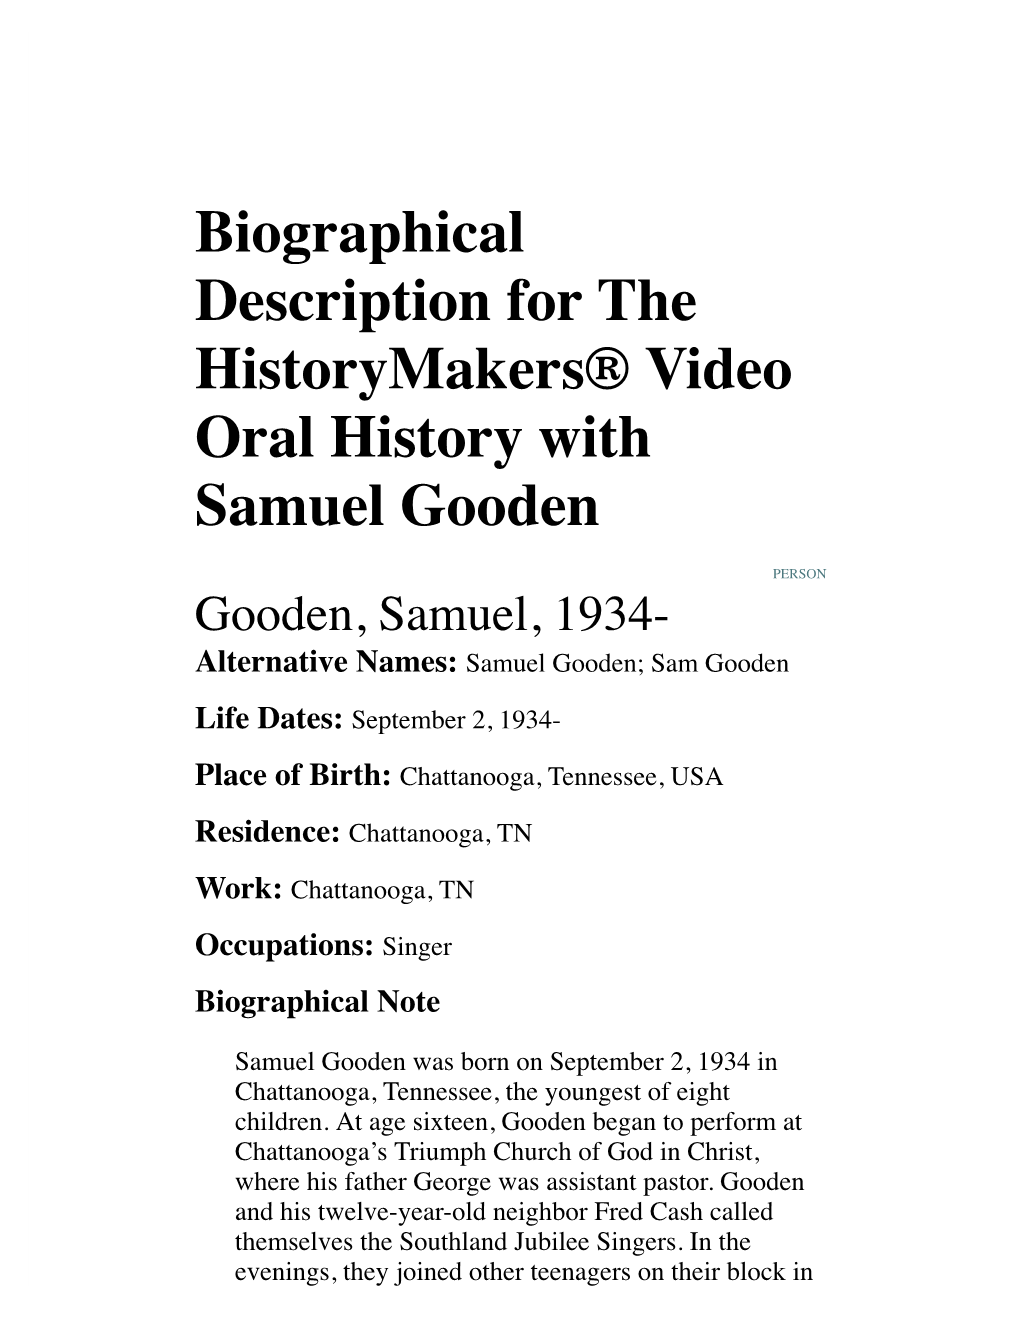 Biographical Description for the Historymakers® Video Oral History with Samuel Gooden